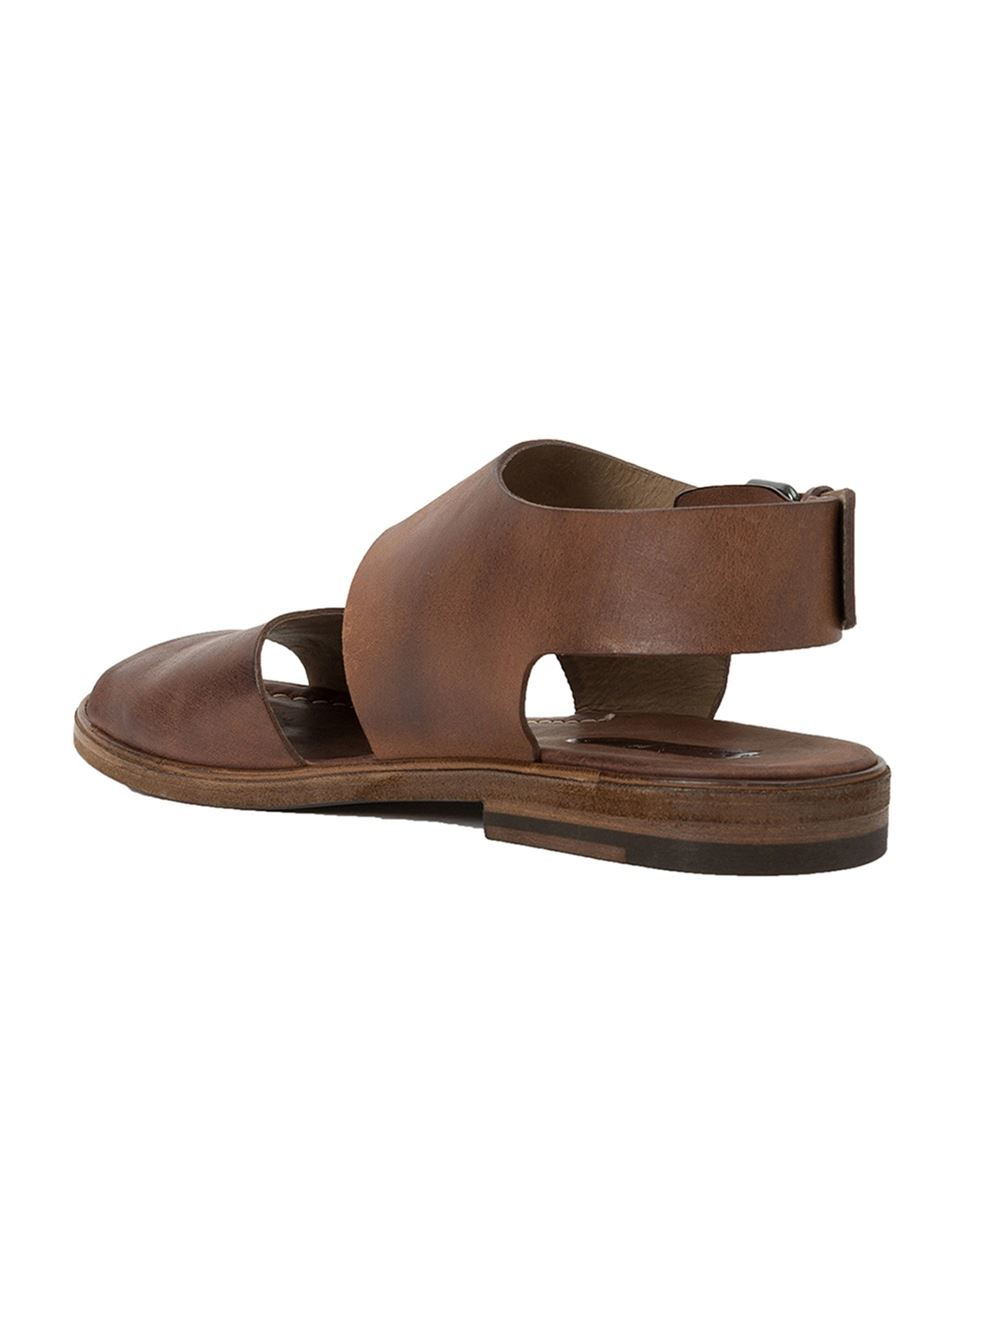 Lyst Mars ll lego Sandals  in Brown for Men